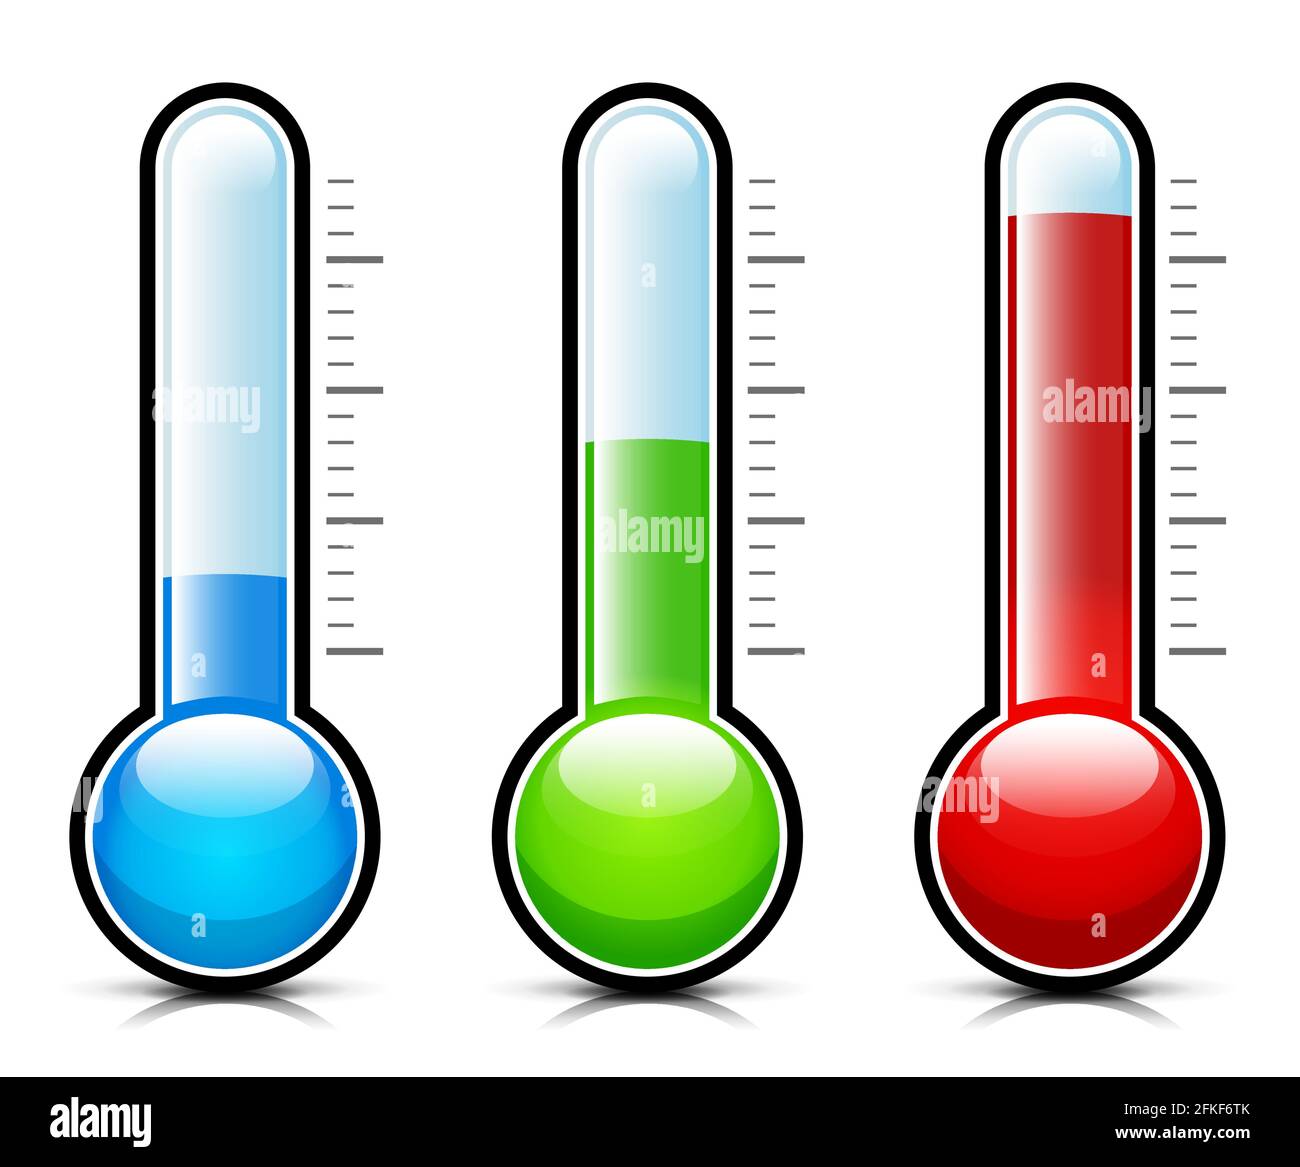 Vector illustration of temperature thermometer measurement icons Stock Vector